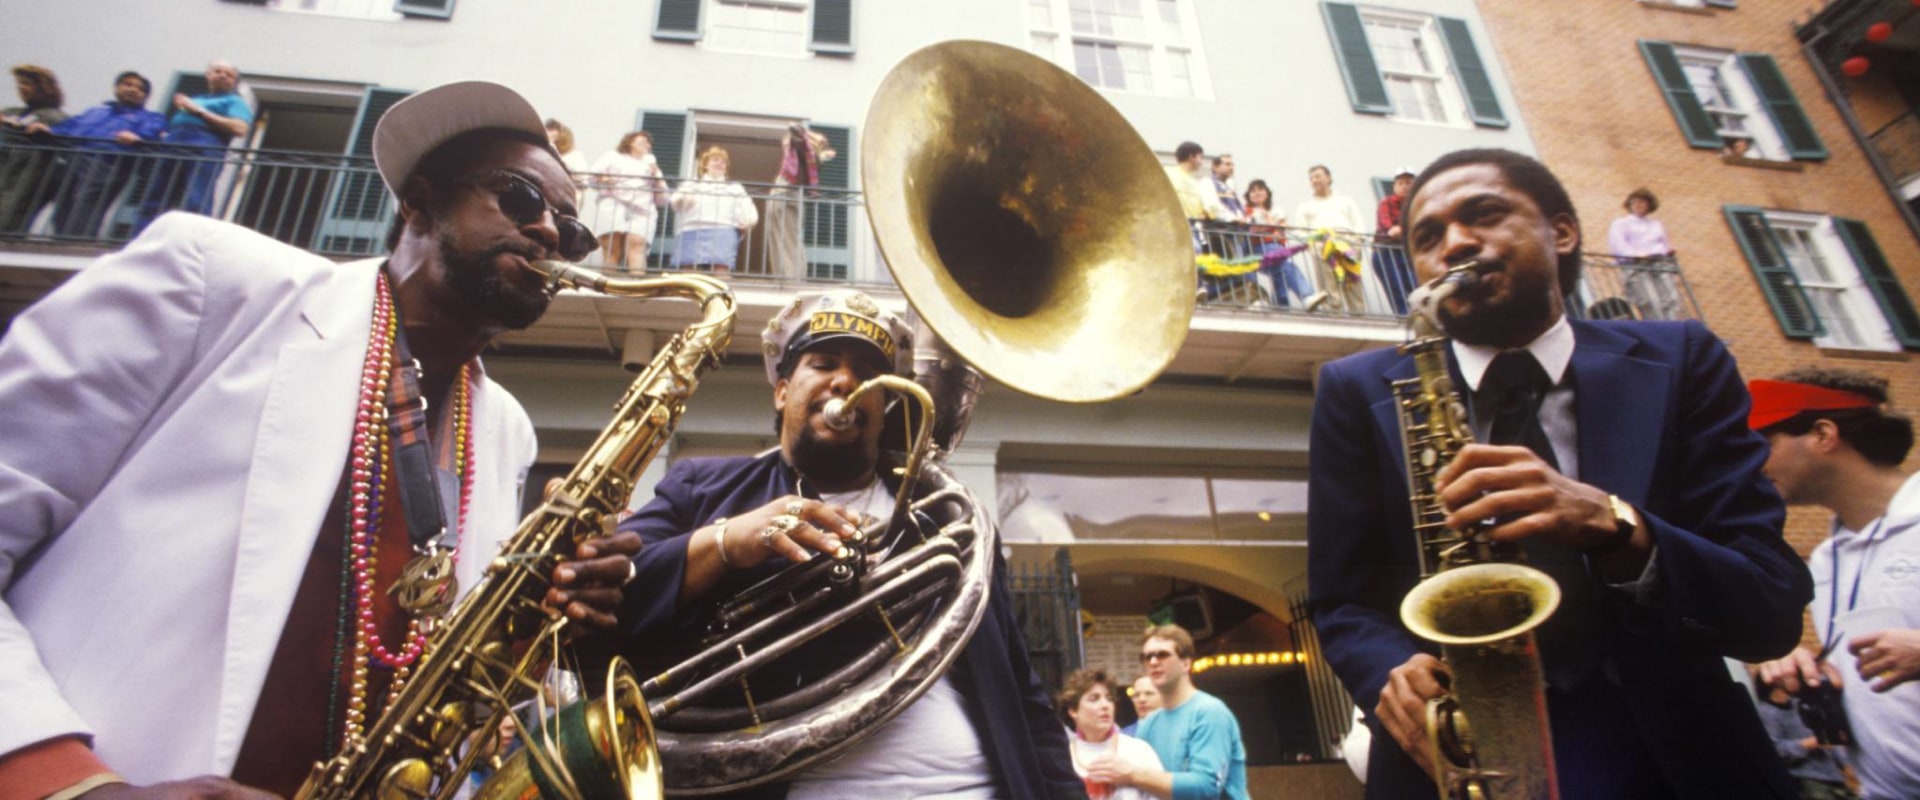 The Best Music Venues in New Orleans for Musicians and Music Lovers